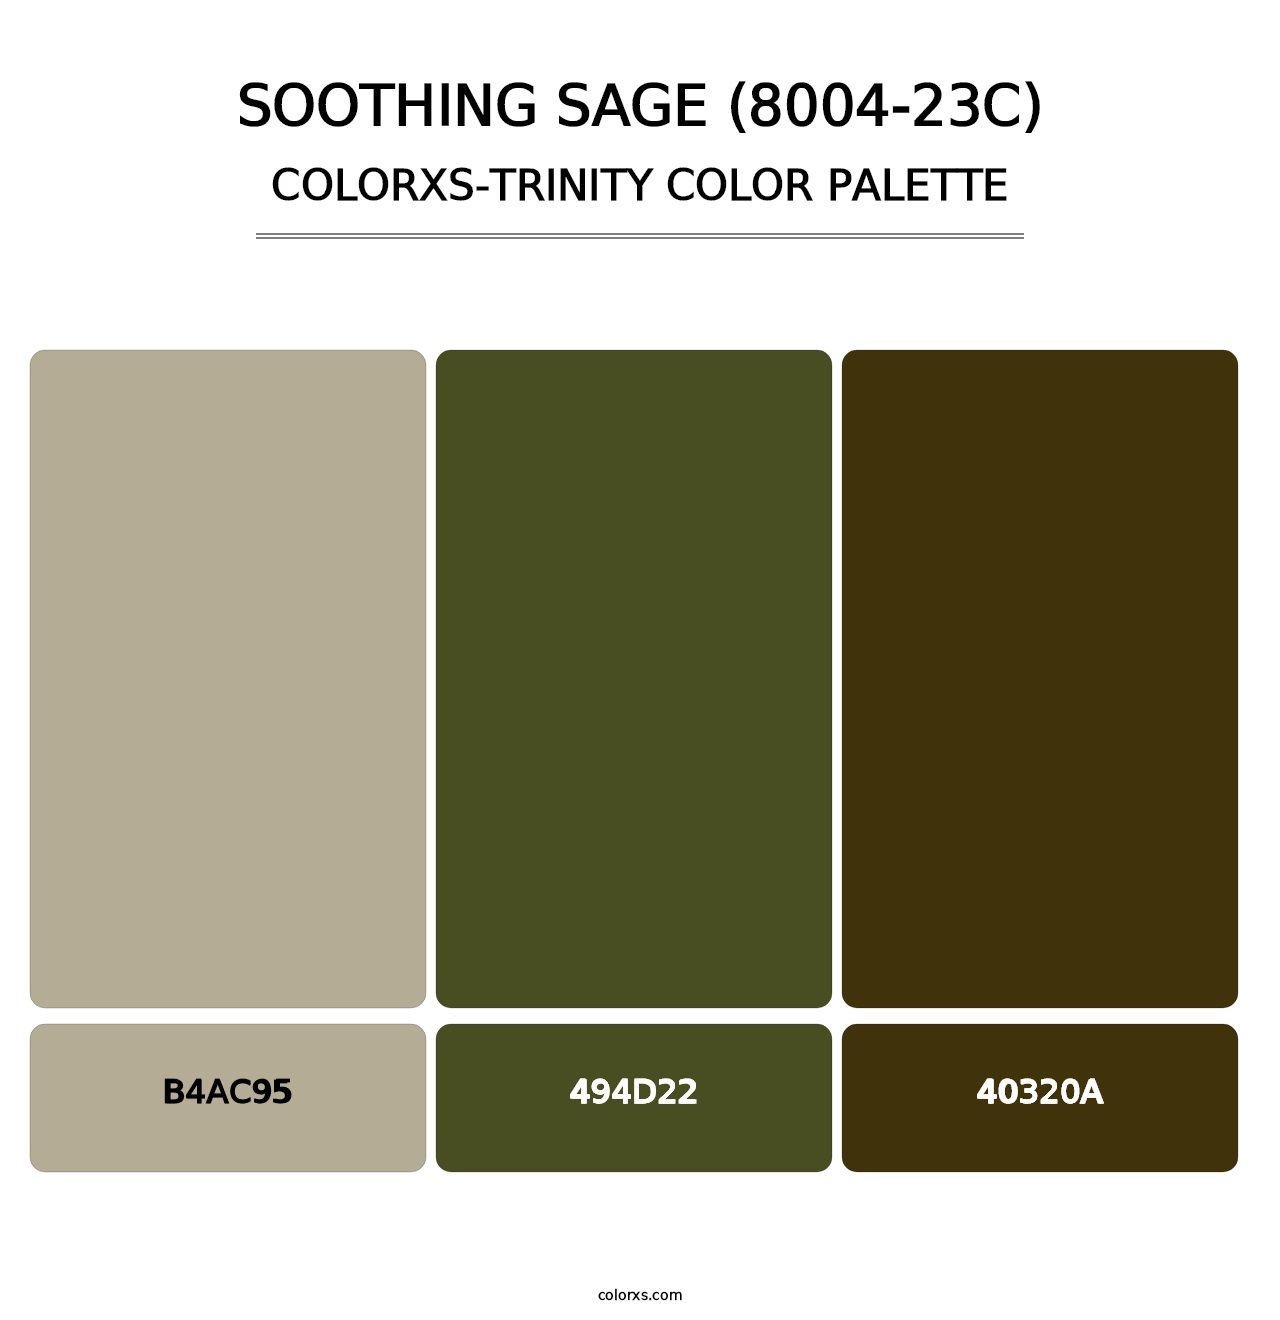 Soothing Sage (8004-23C) - Colorxs Trinity Palette